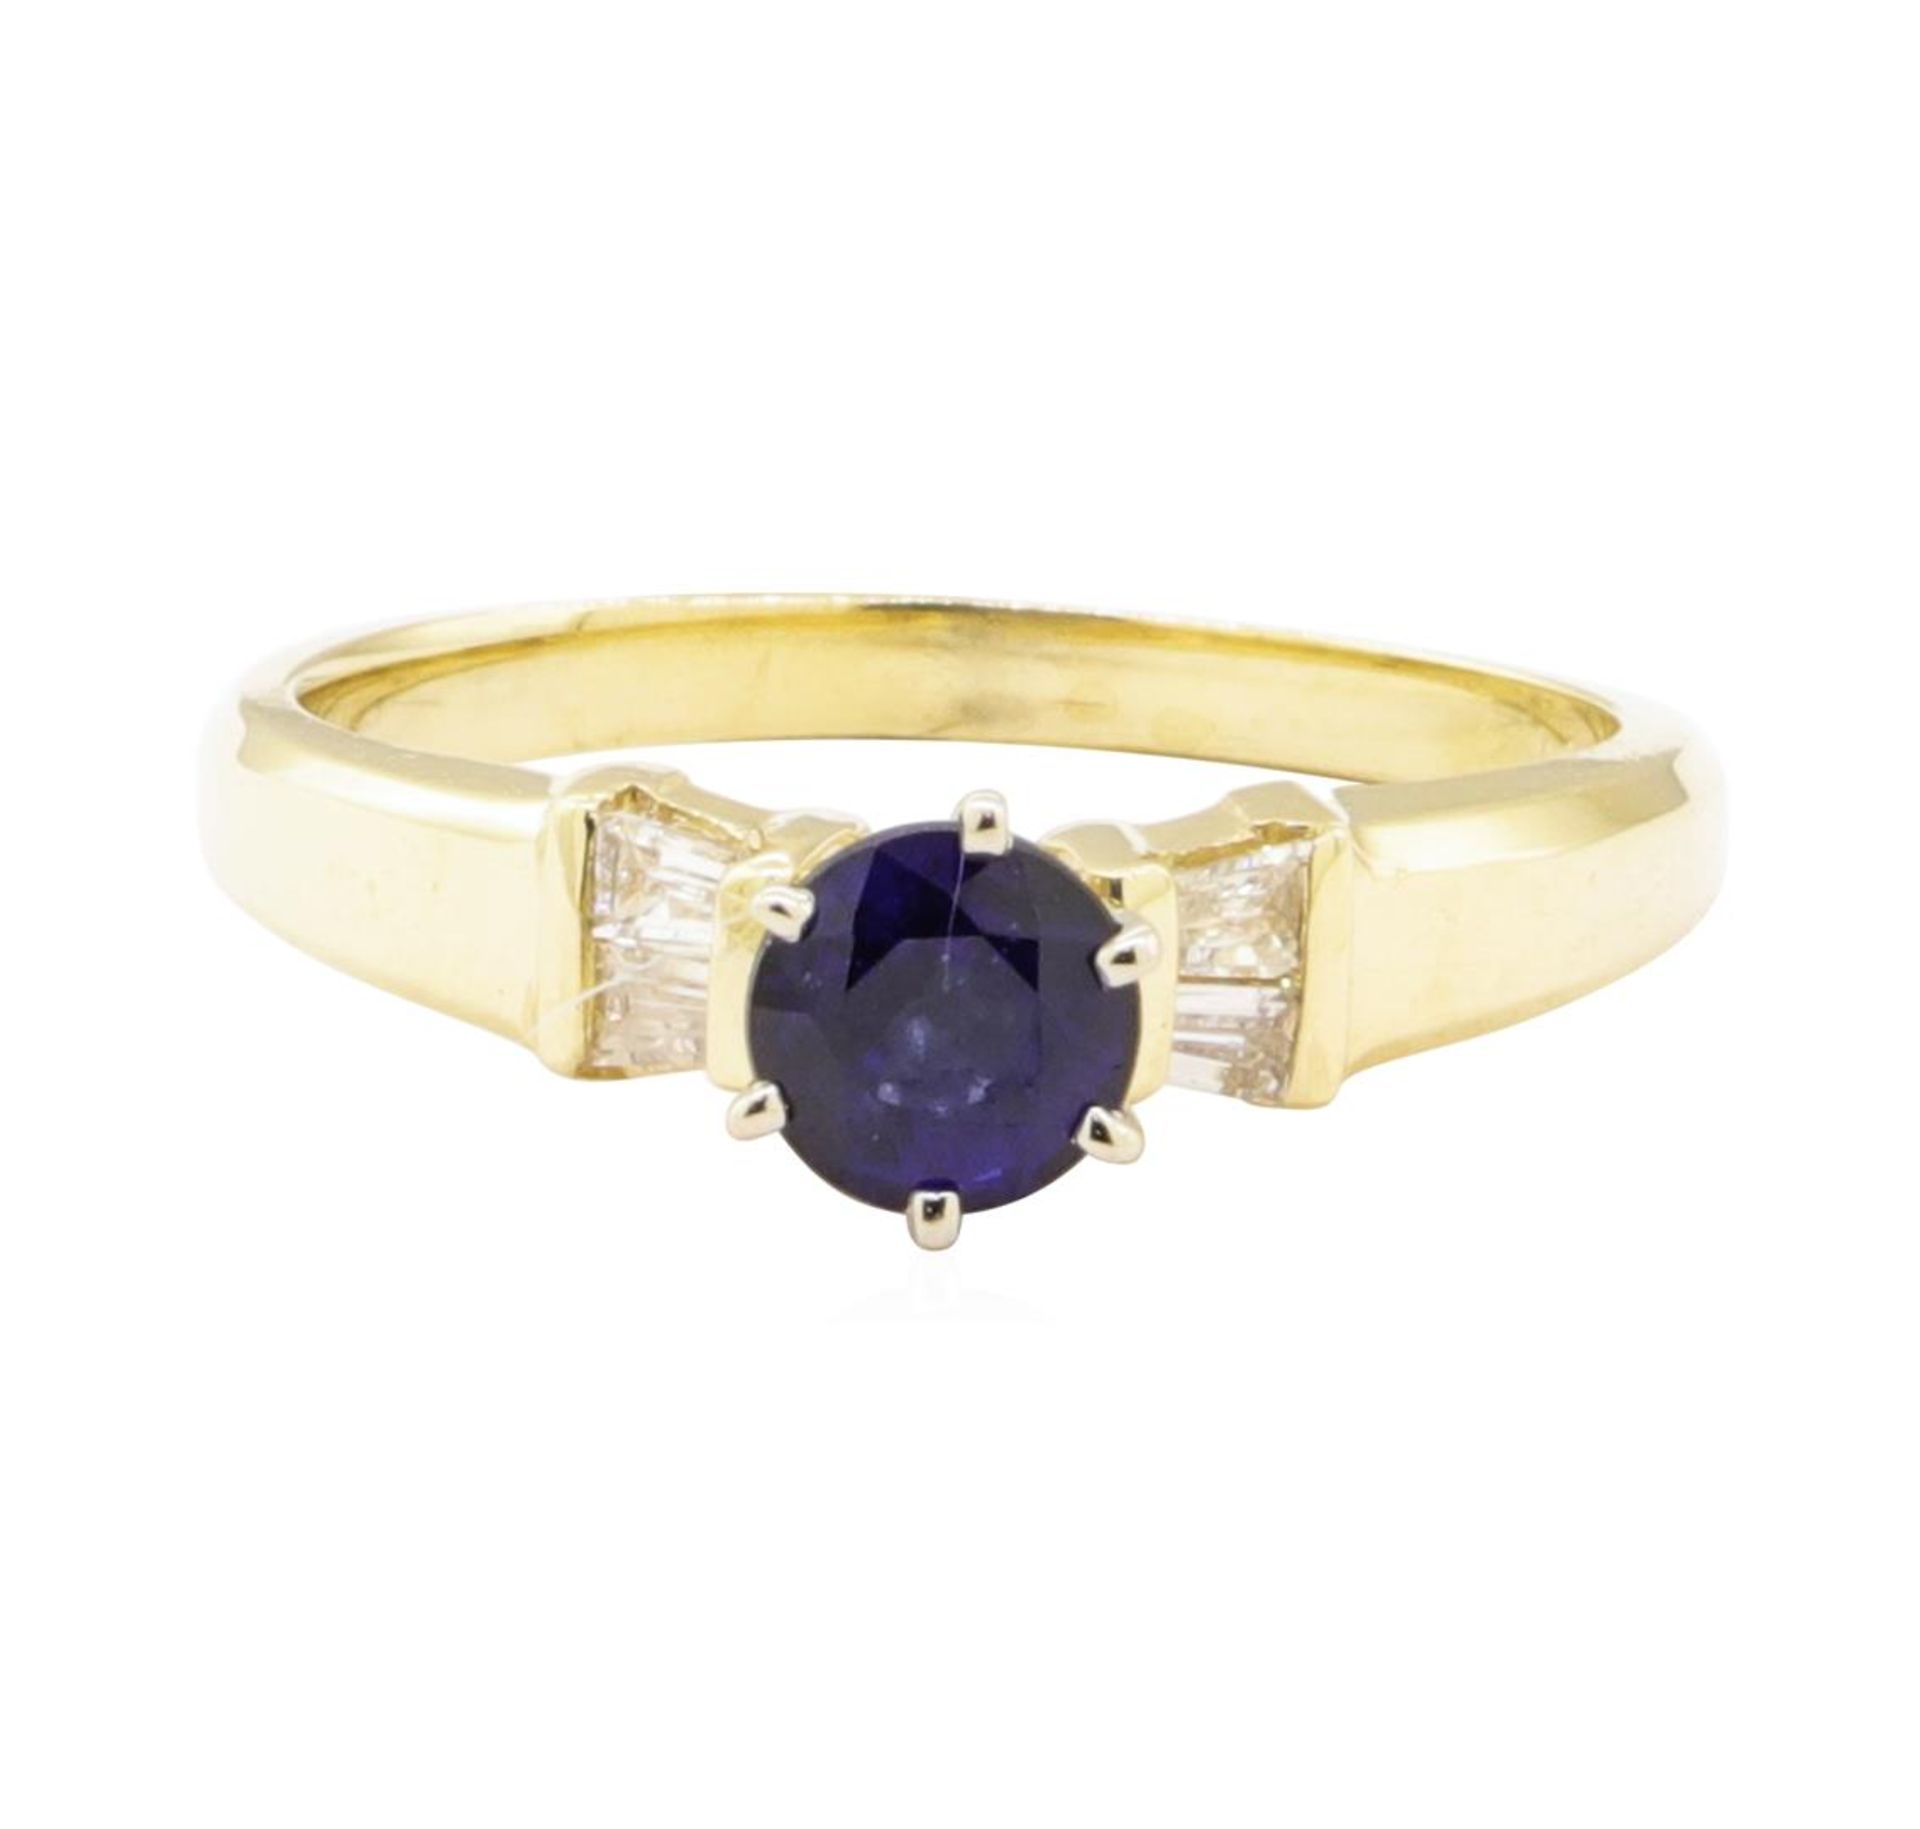 0.98 ctw Blue Sapphire and Diamond Ring - 14KT Yellow Gold - Image 2 of 4